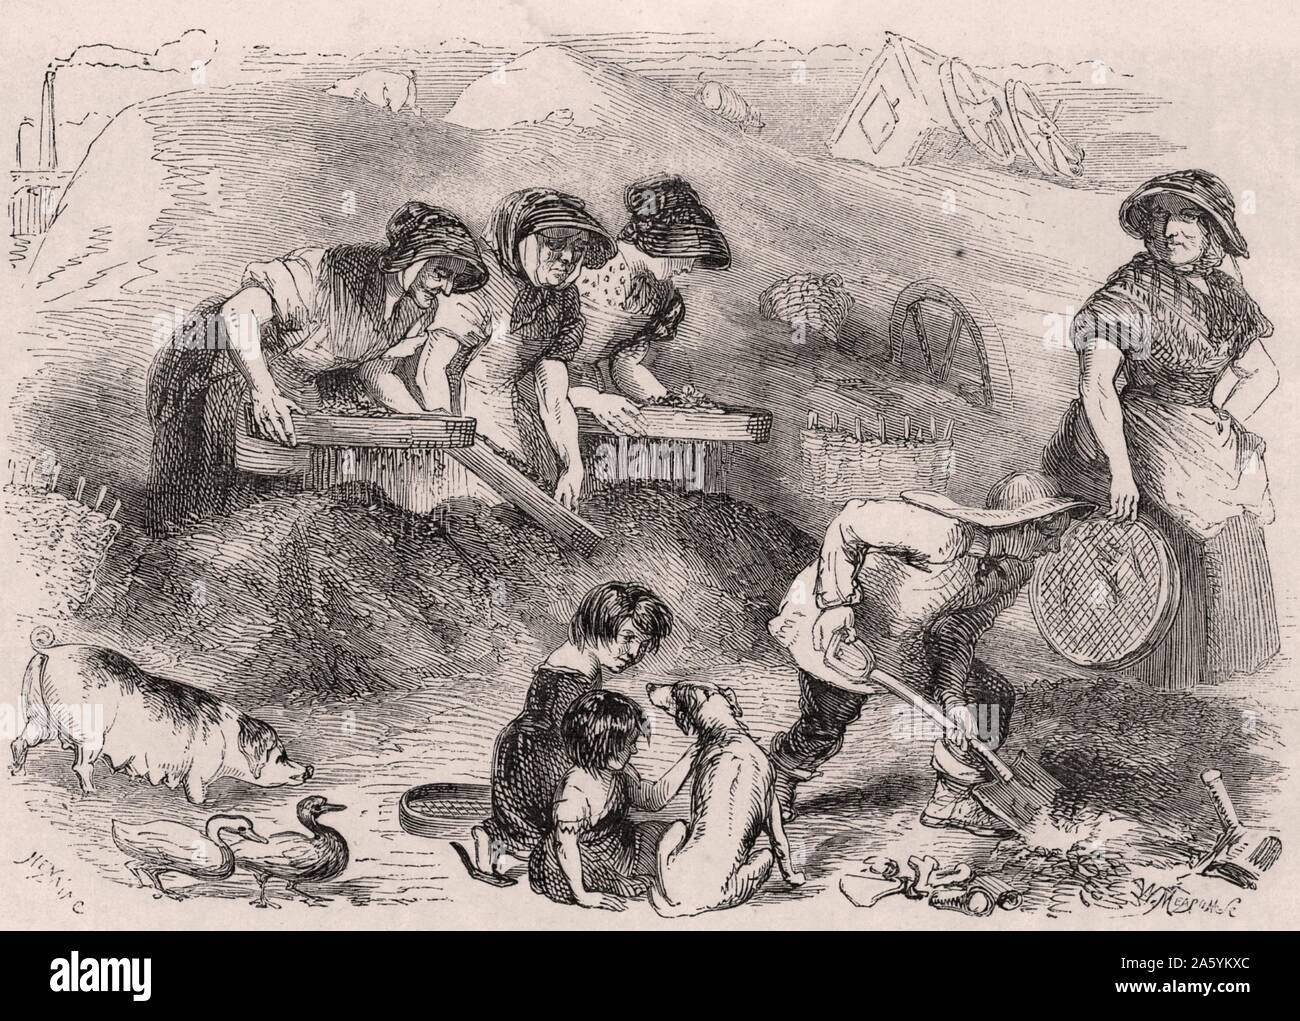 Image of Child Labour by Pauquet, Hippolyte Louis (1797-1871) & Polydore  (1800-1879)